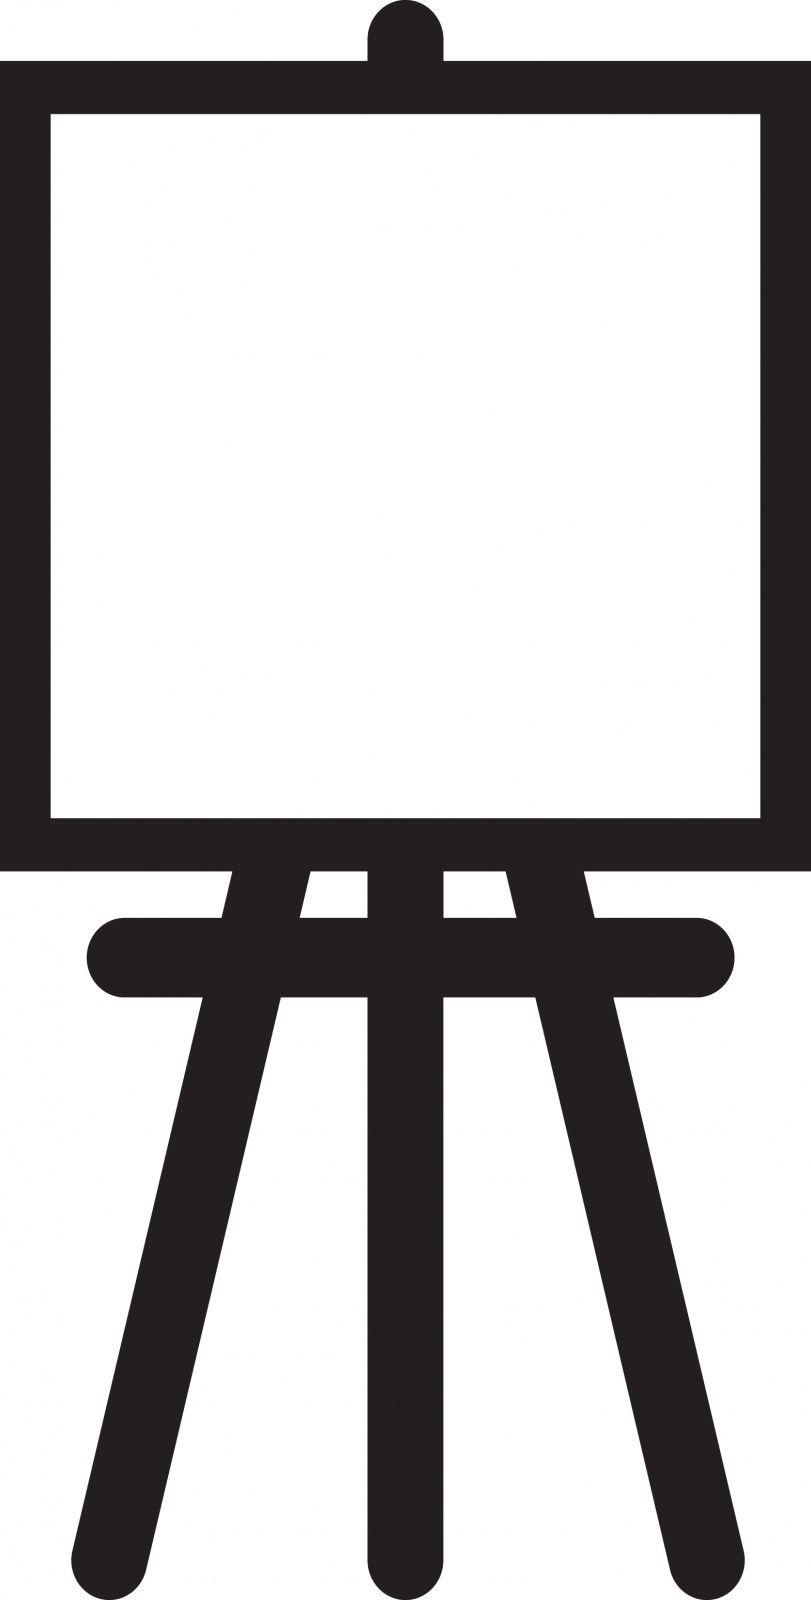 Painting Black and White Logo - Free Easel Cliparts, Download Free Clip Art, Free Clip Art on ...